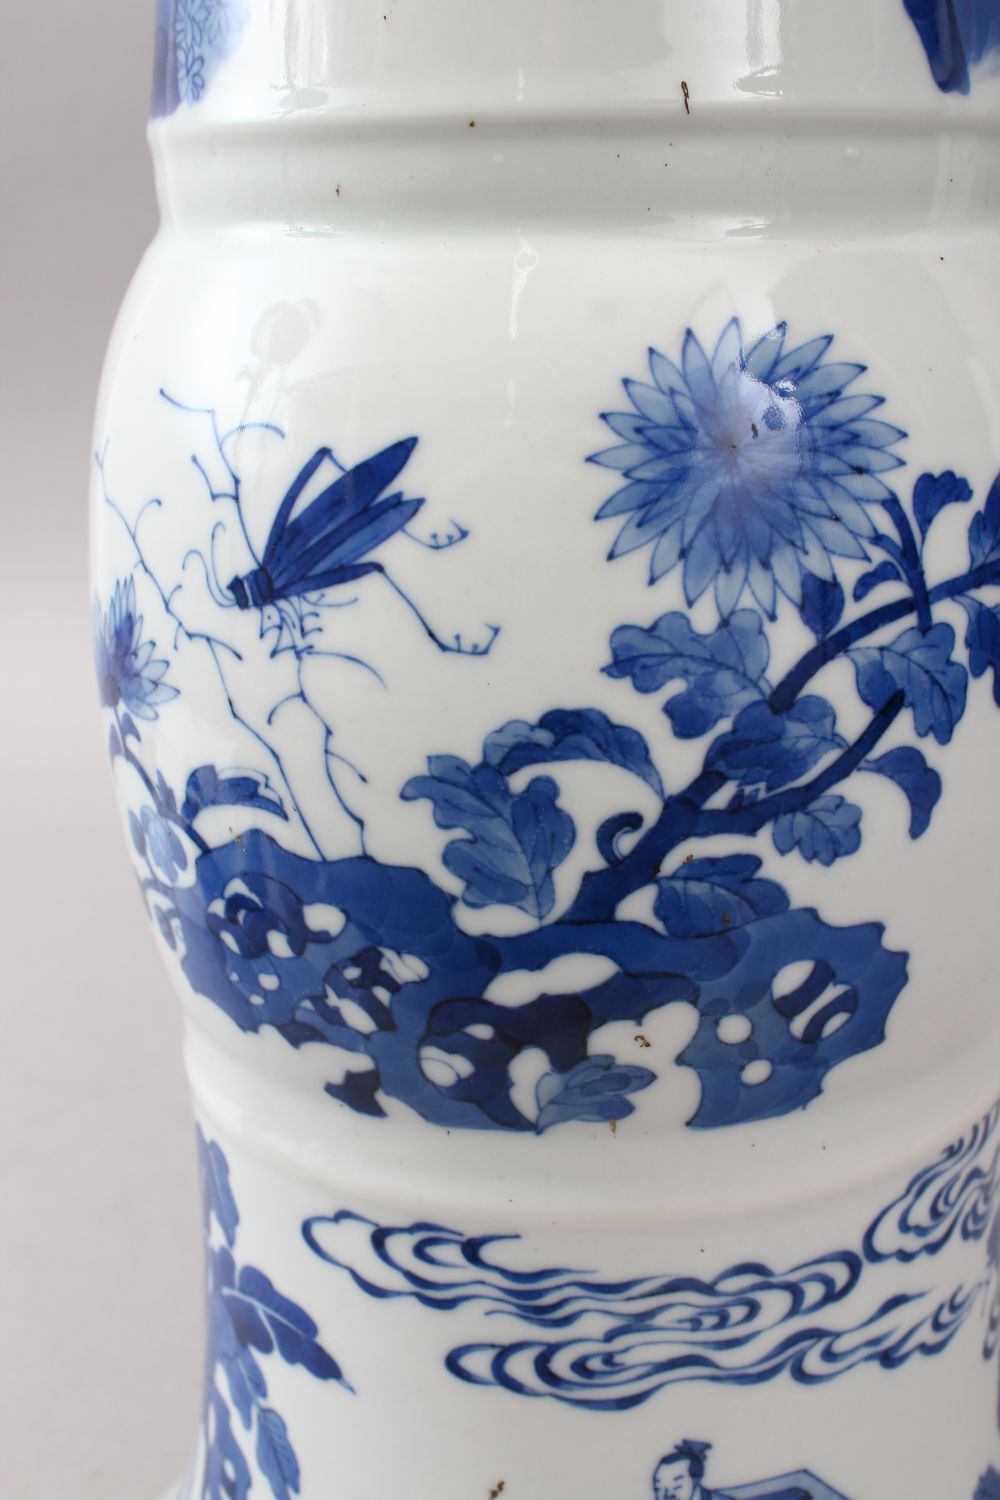 A LARGE CHINESE BLUE & WHITE PORCELAIN YEN YEN VASE, the body of the vase decorated with scenes of - Image 5 of 7